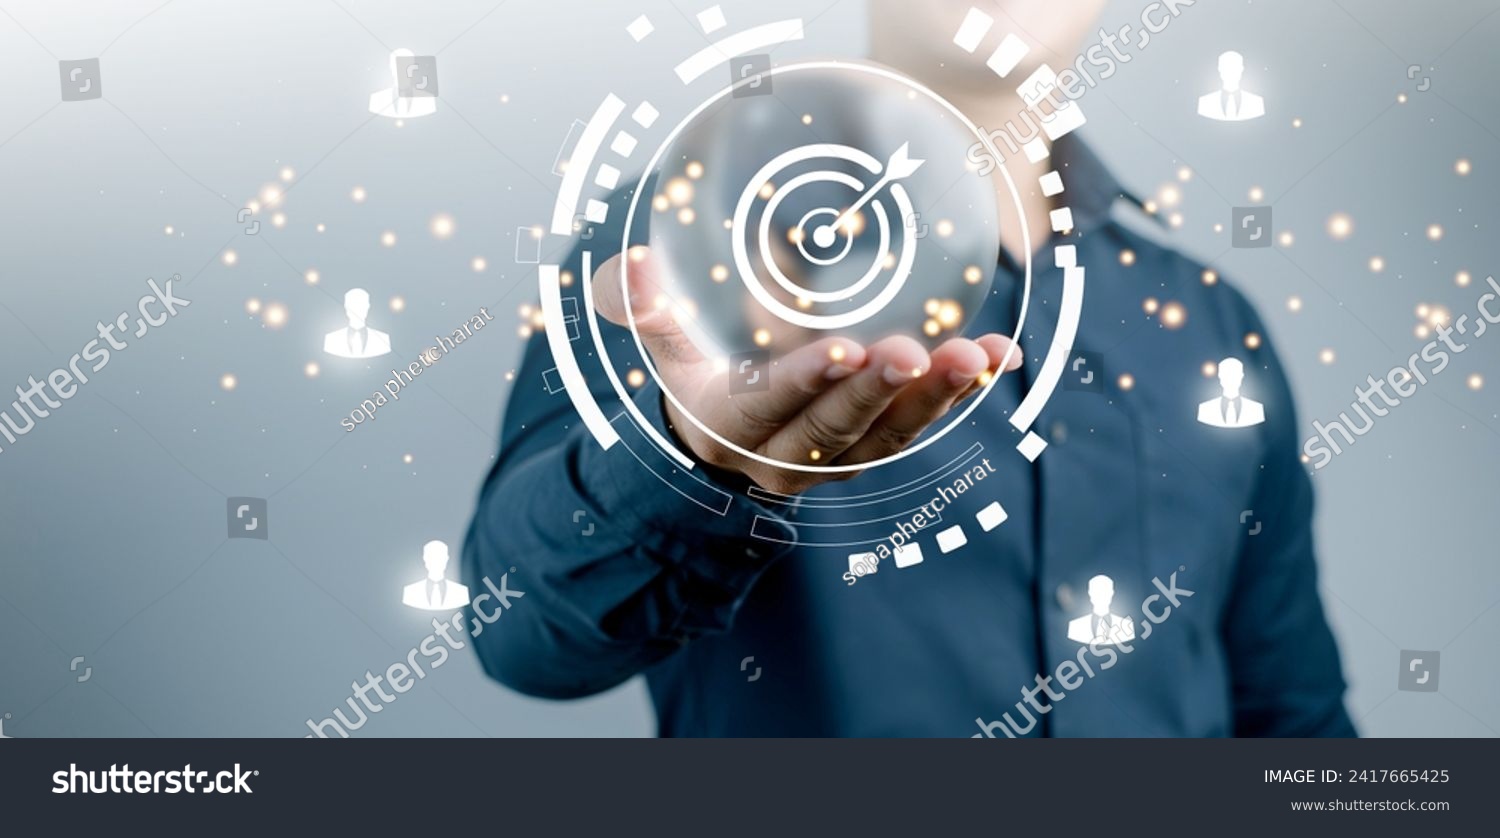 Target Achievement and Business Goals Digital Concept : Business professional presenting a target and goal achievement concept with digital holographic projection. #2417665425